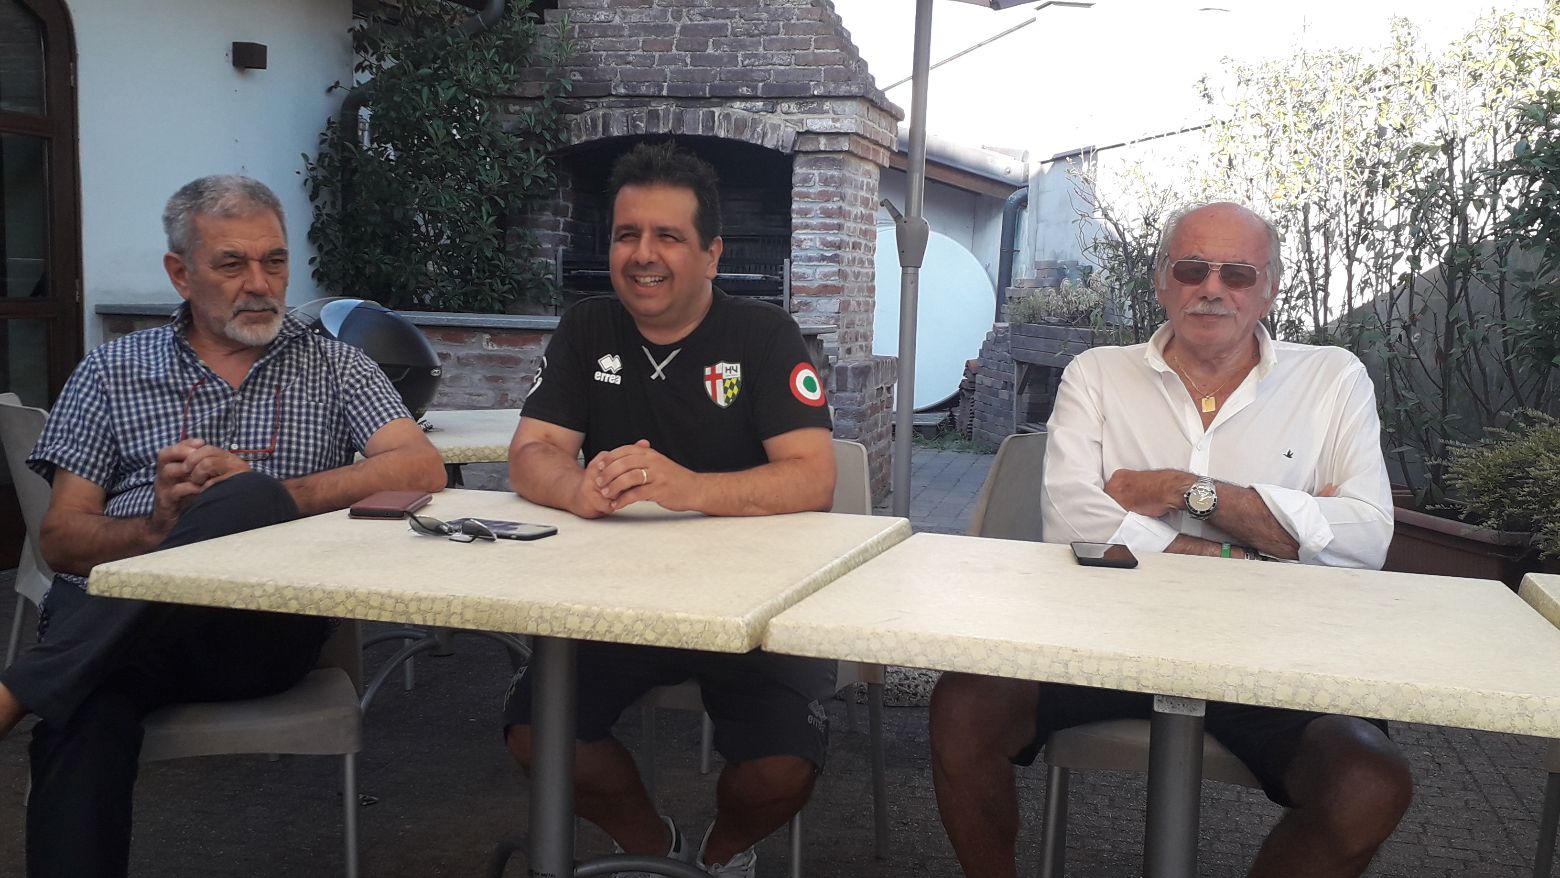 Roller Hockey – In September two championships at the highest level in Palapregnolato: Paolo Sala Memorial and Paolo Torazzo